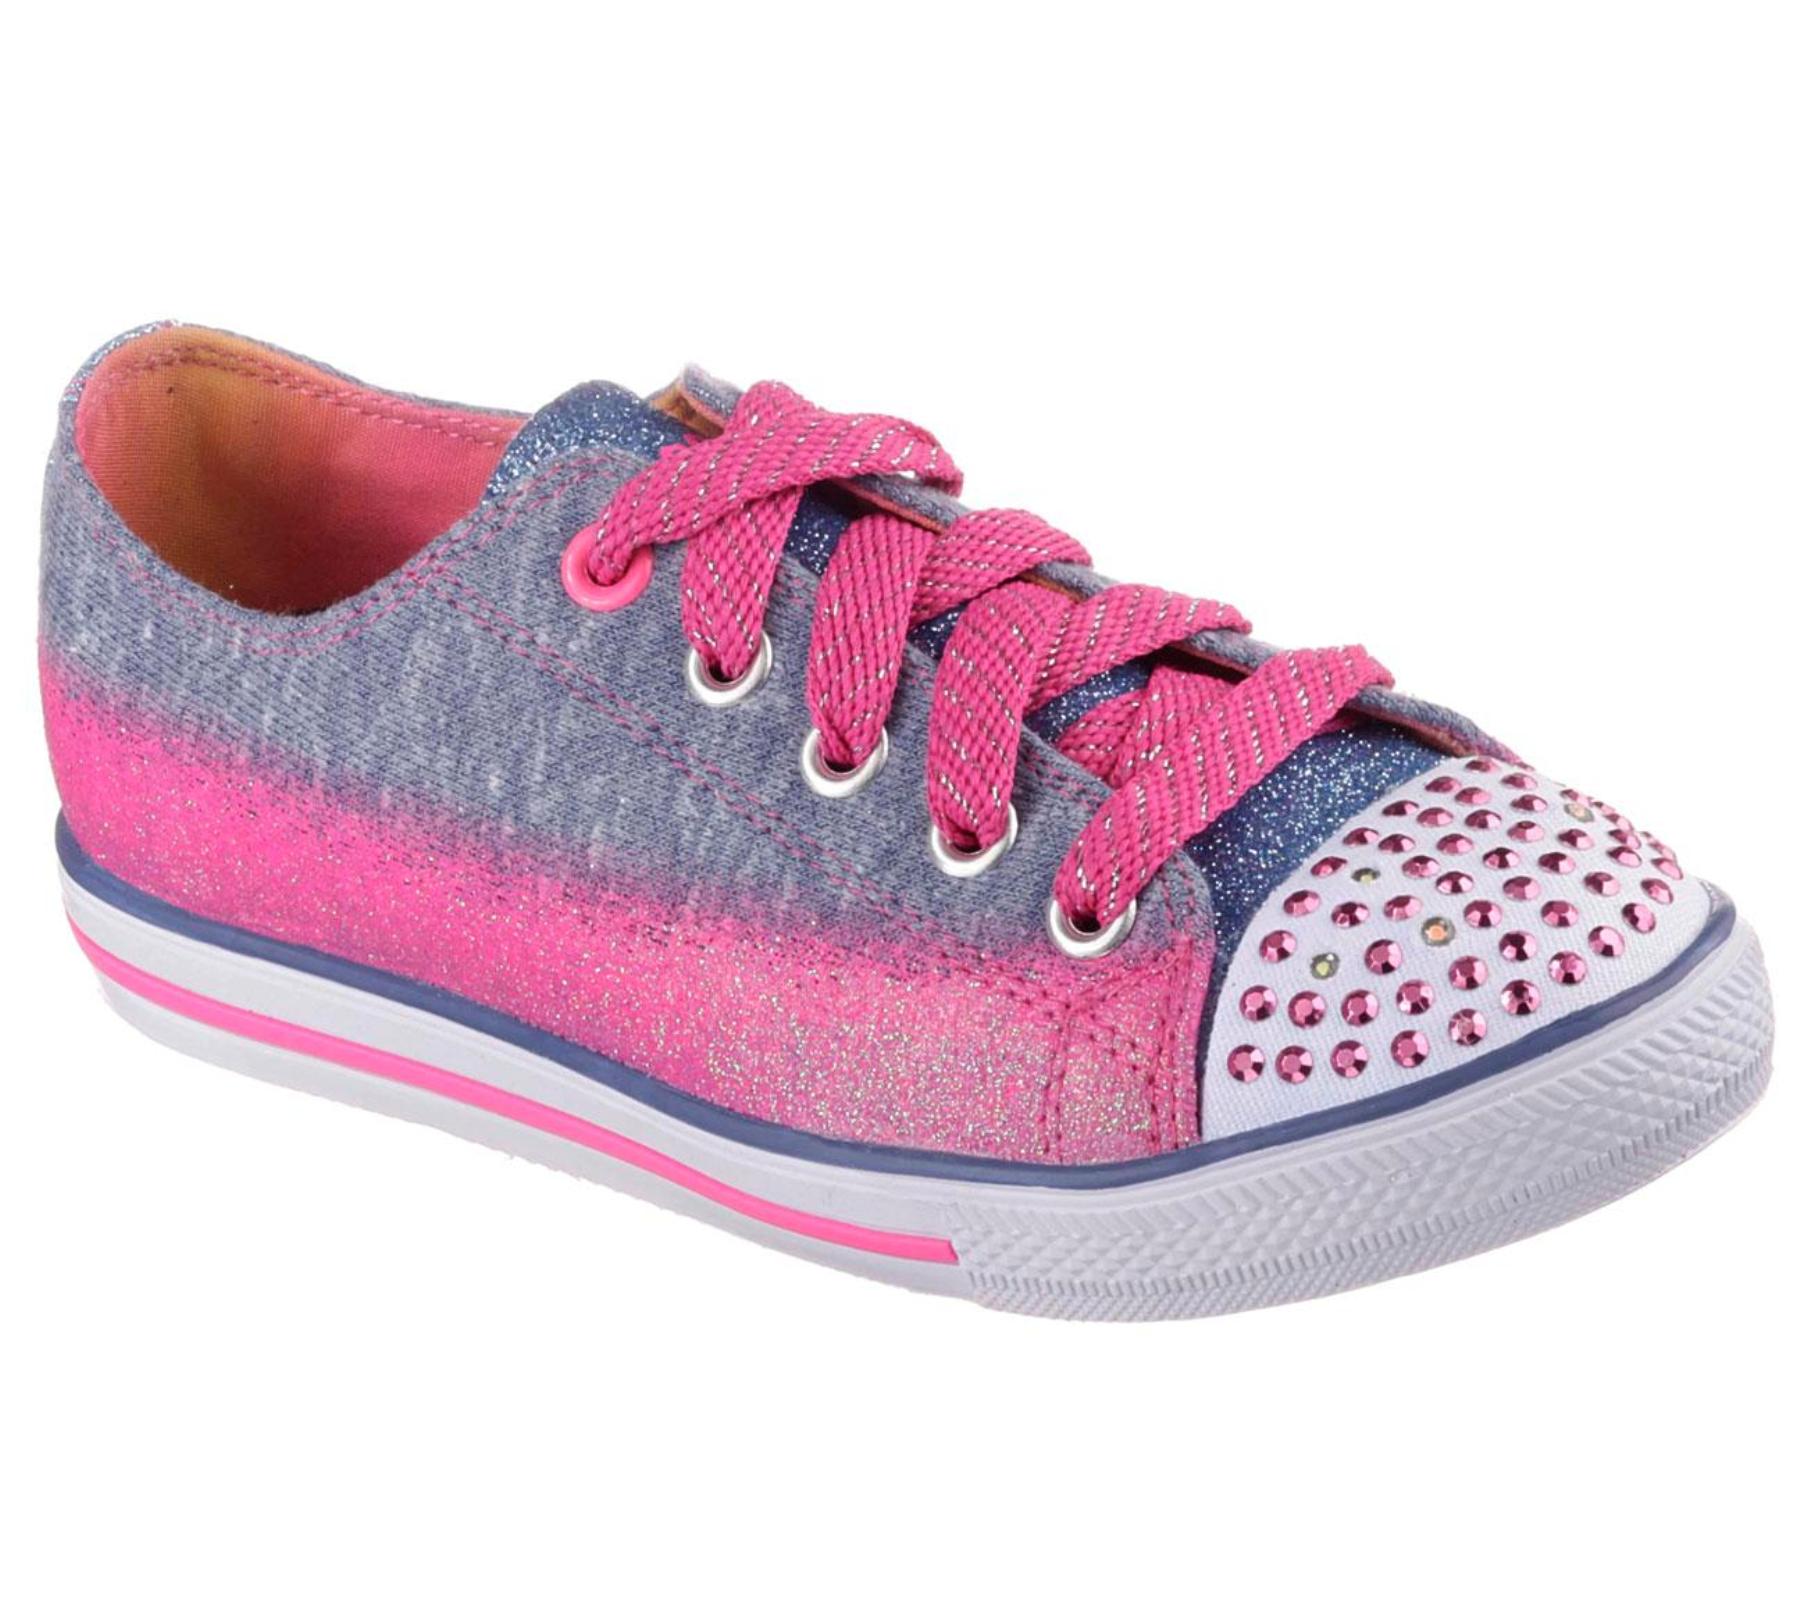 Skechers Girl's Twinkle Toes Sweet Surprise Pink/Multicolor Light-Up Athletic Shoe